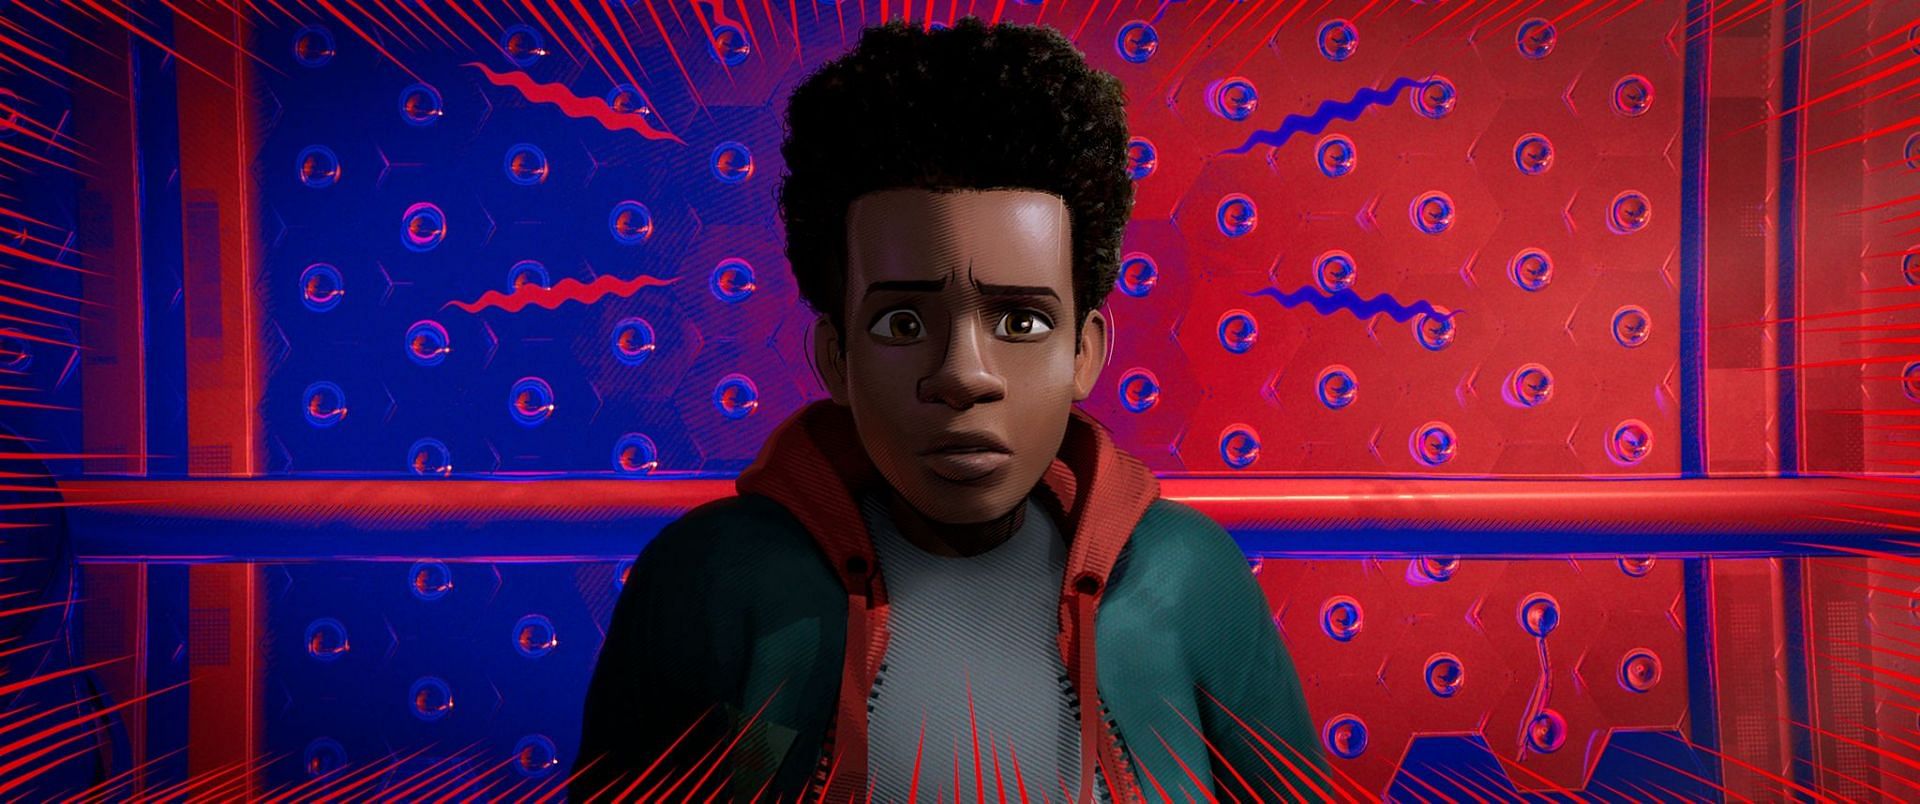 Teenage superhero Miles Morales, a symbol of Black excellence and representation in the comic book world, uses his spider-like abilities to protect the streets of Brooklyn (Image via Sony Pictures)